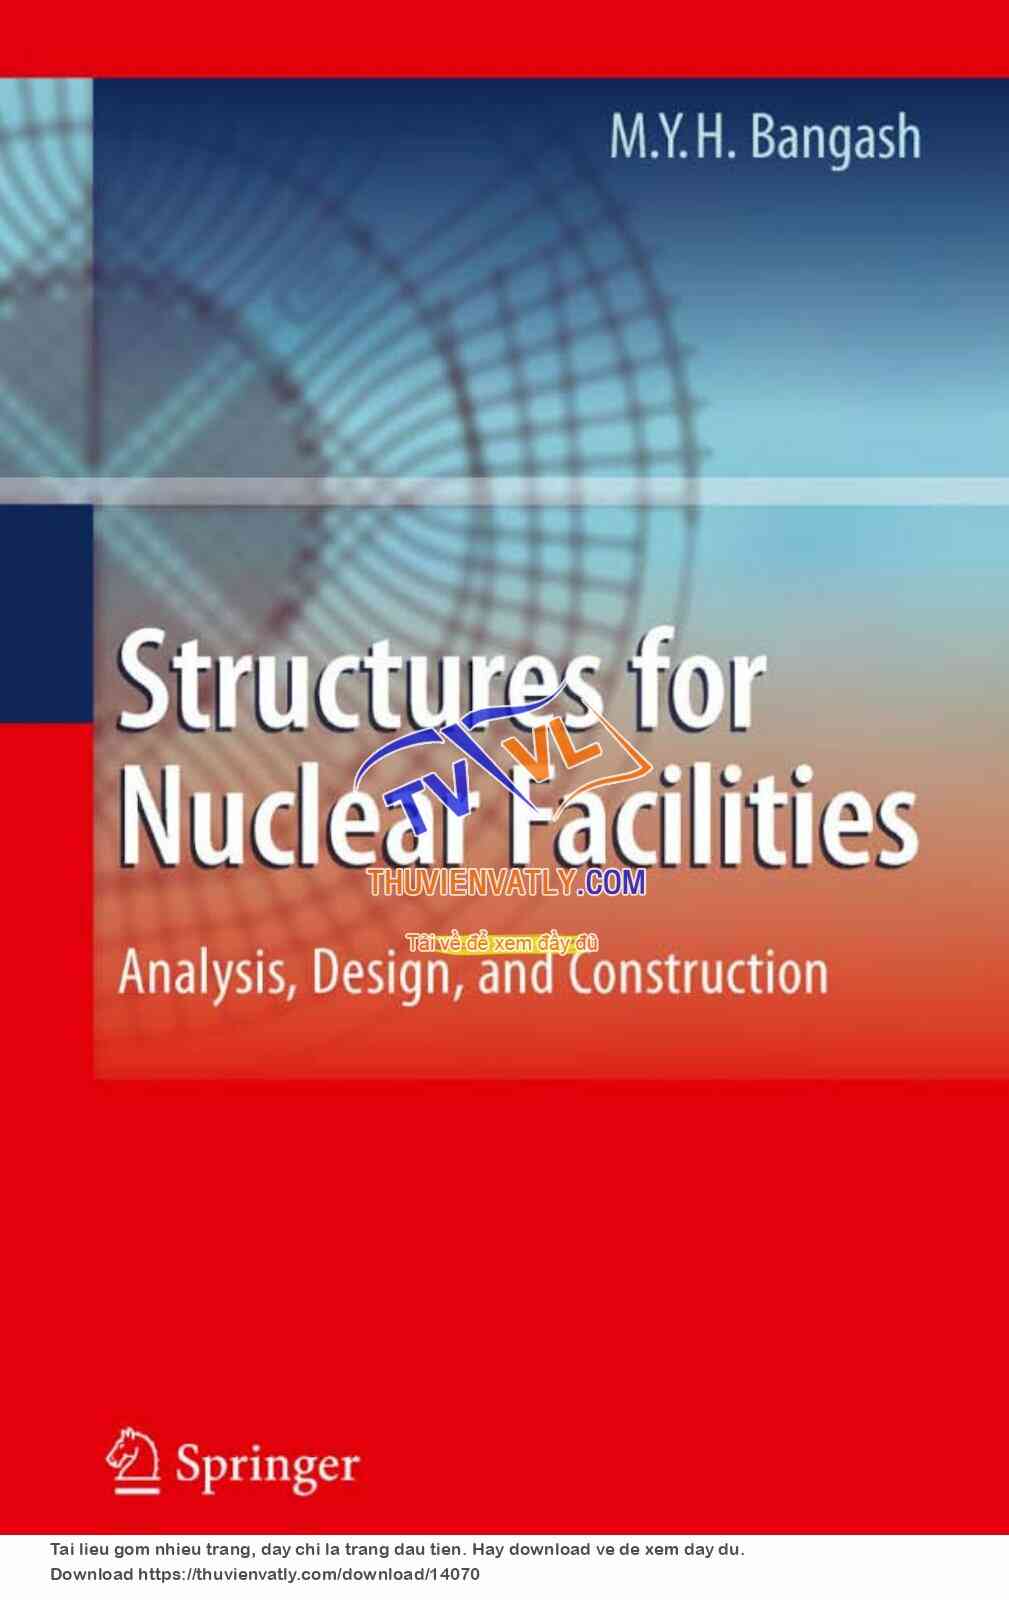 Structures for Nuclear Facilities - Analysis, Design and Construction - M. Bangash (Springer, 2011)